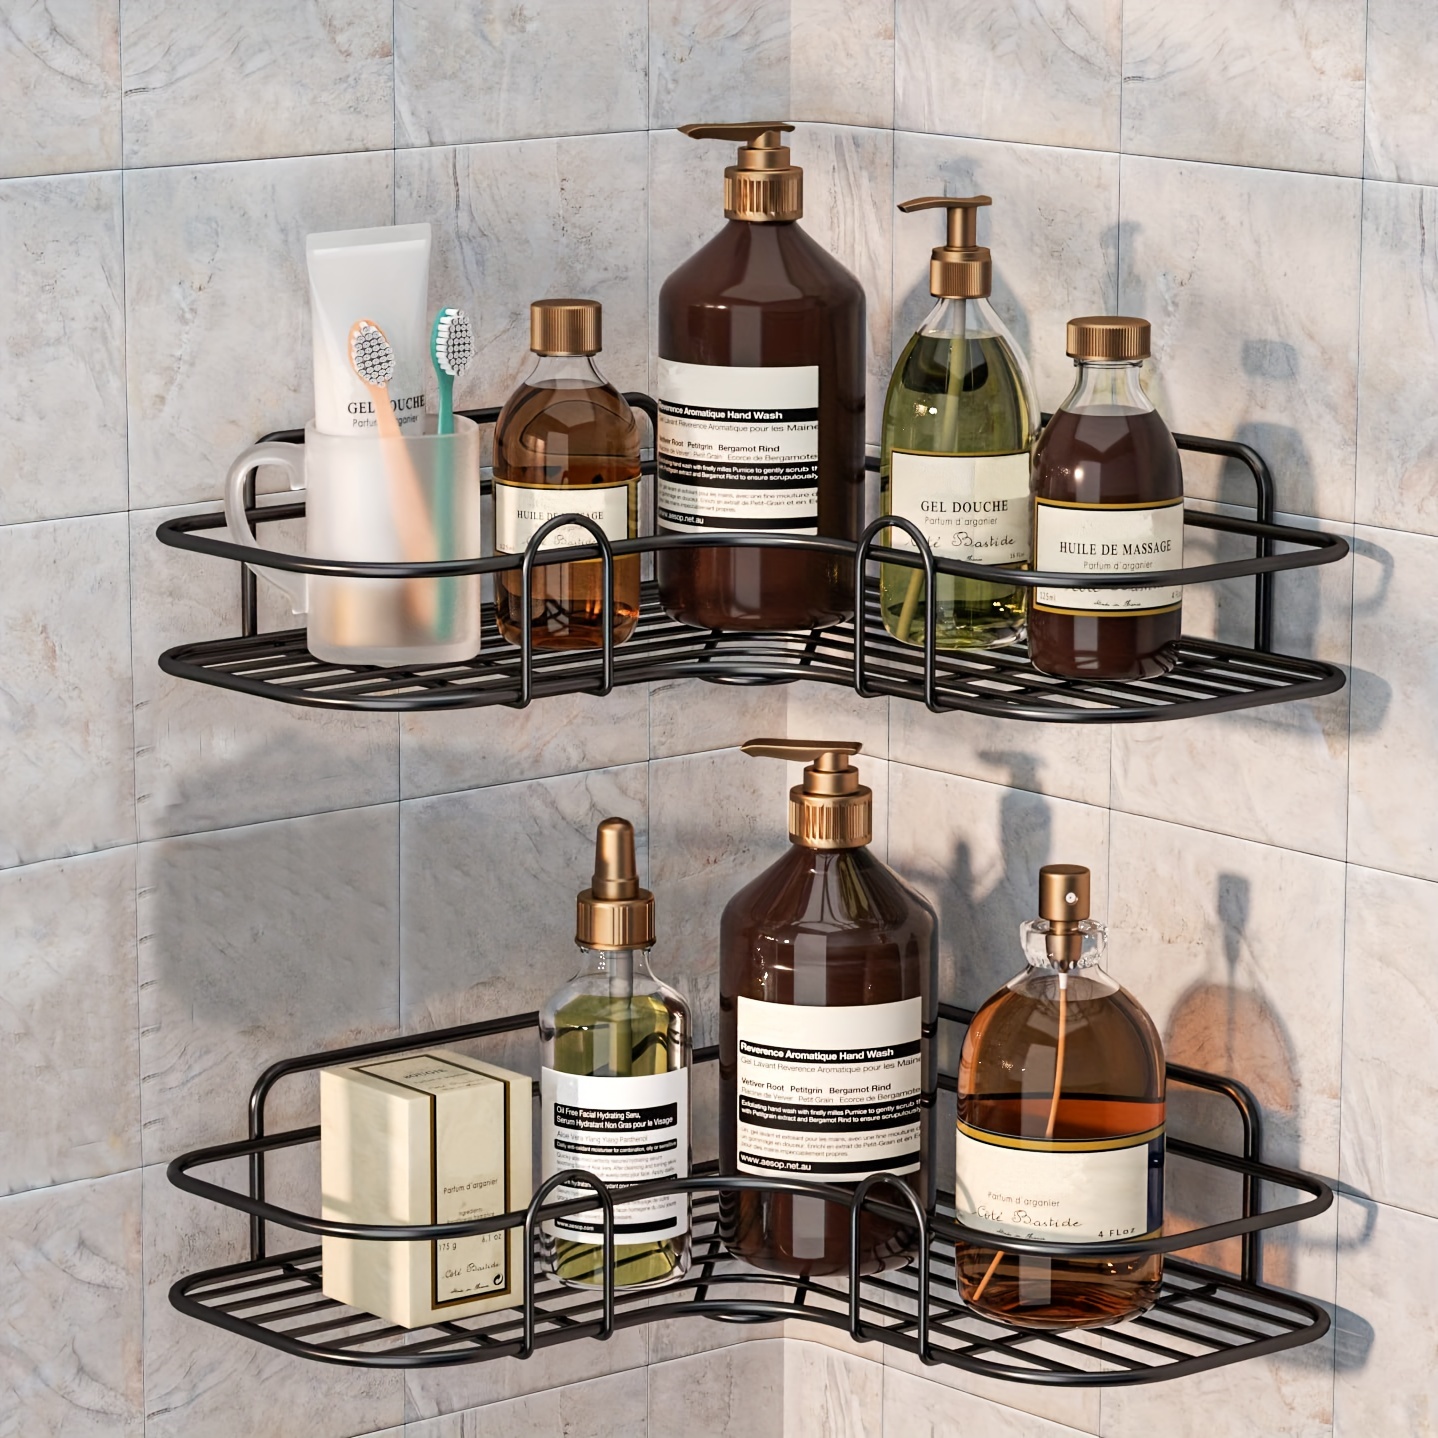 Corner Shower Caddy Suction Cup No-drilling Removable Bathroom Shower Shelf  Heavy Duty Max Hold 22lbs Caddy Organizer Waterproof & Oilproof Shower Cor